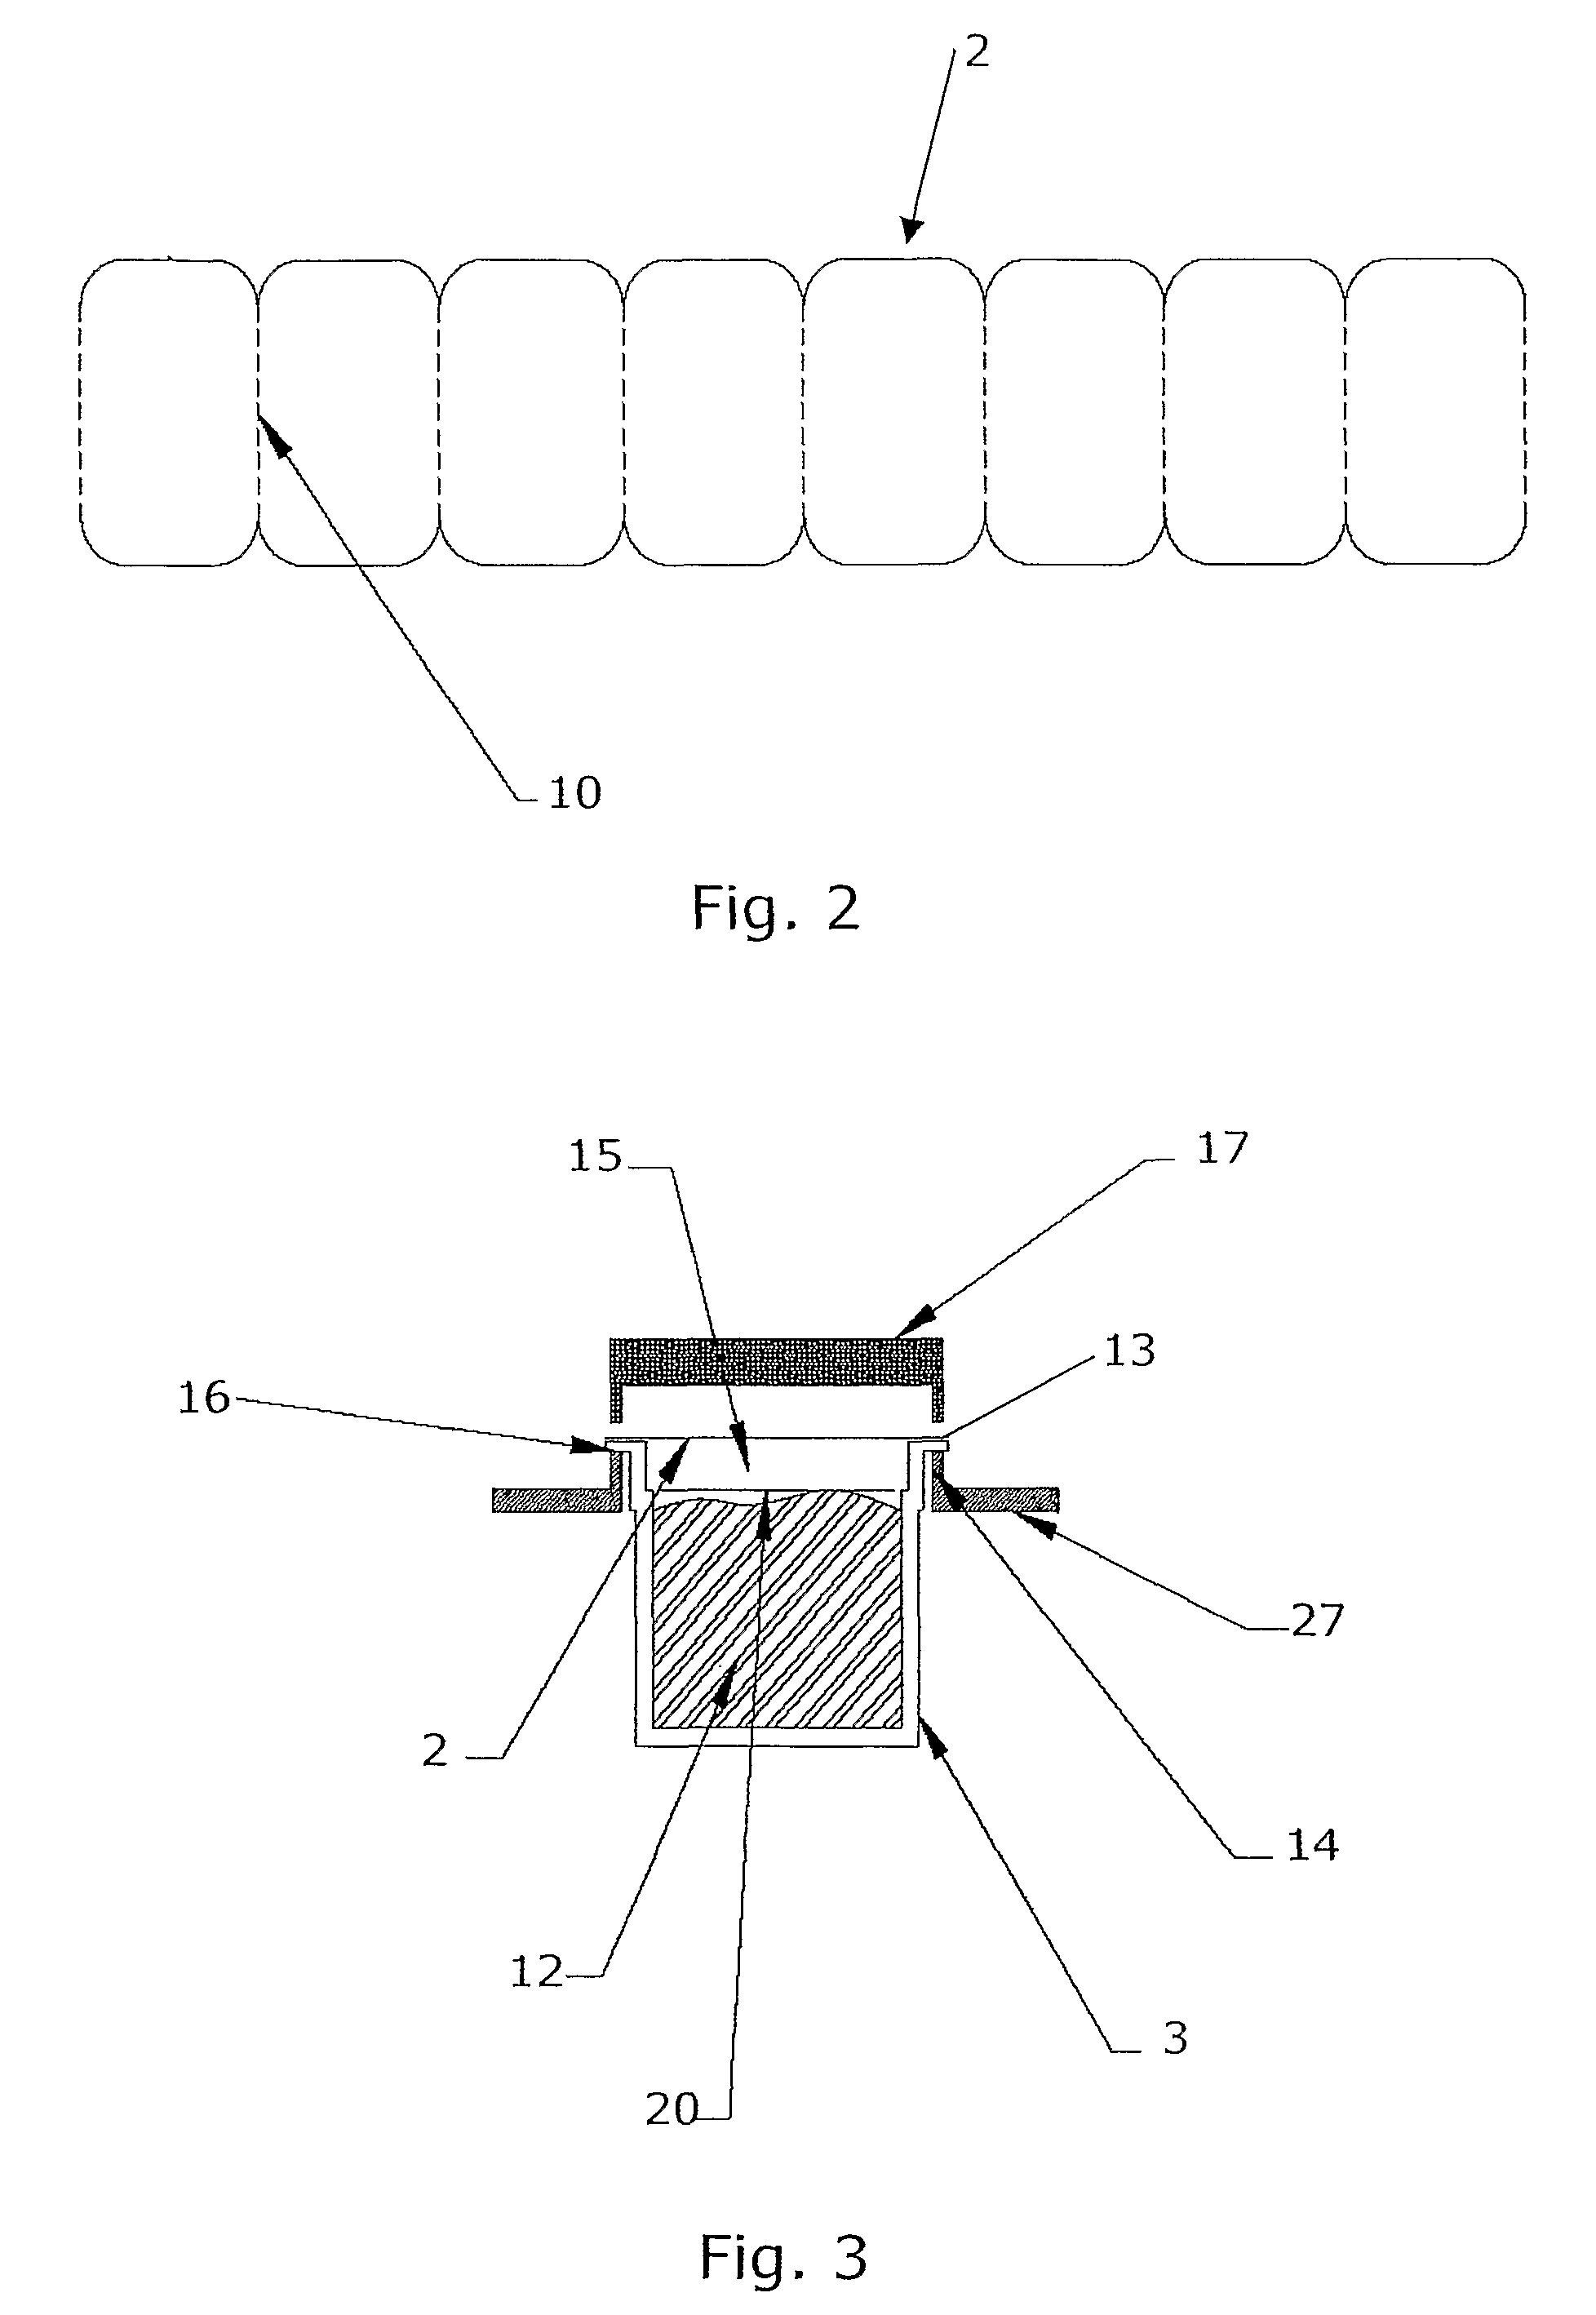 Container closure application system and method